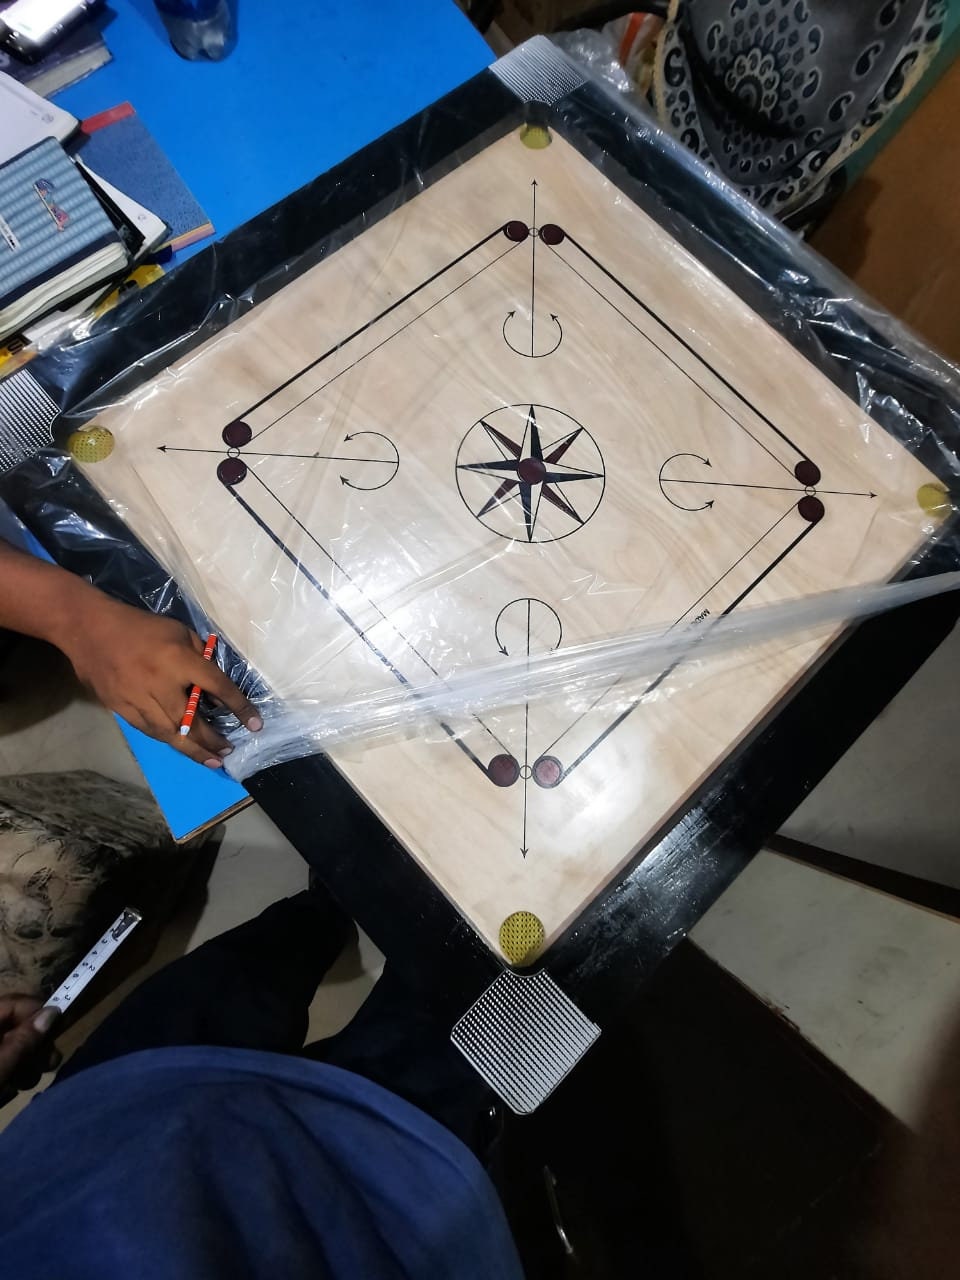 Tournament Full Size Carrom Board with Coins, Striker and Boric Powder